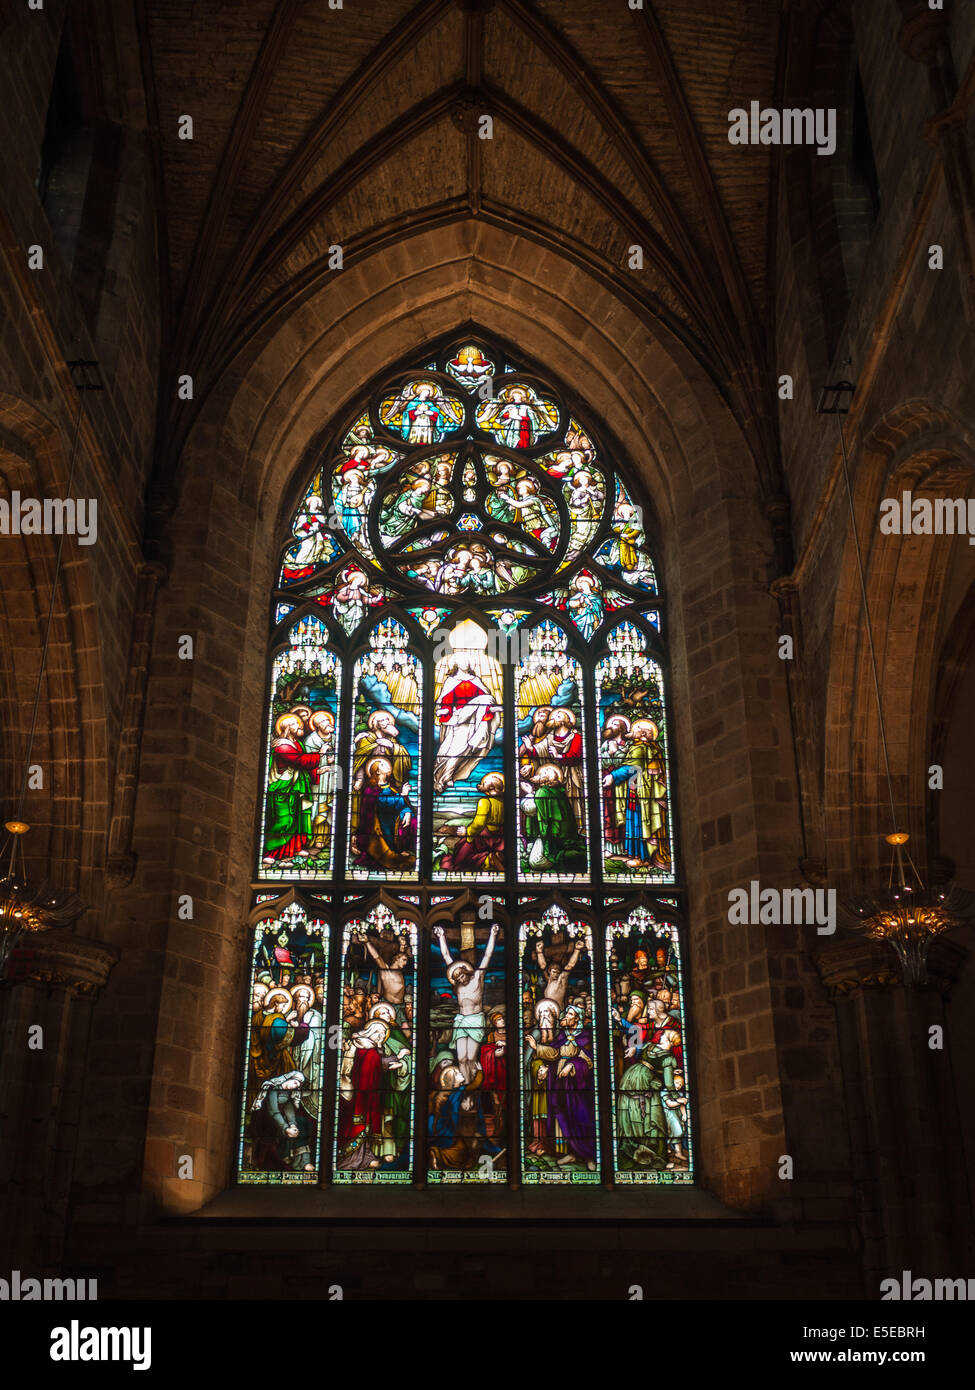 St Giles Cathedral stained glass window Stock Photo